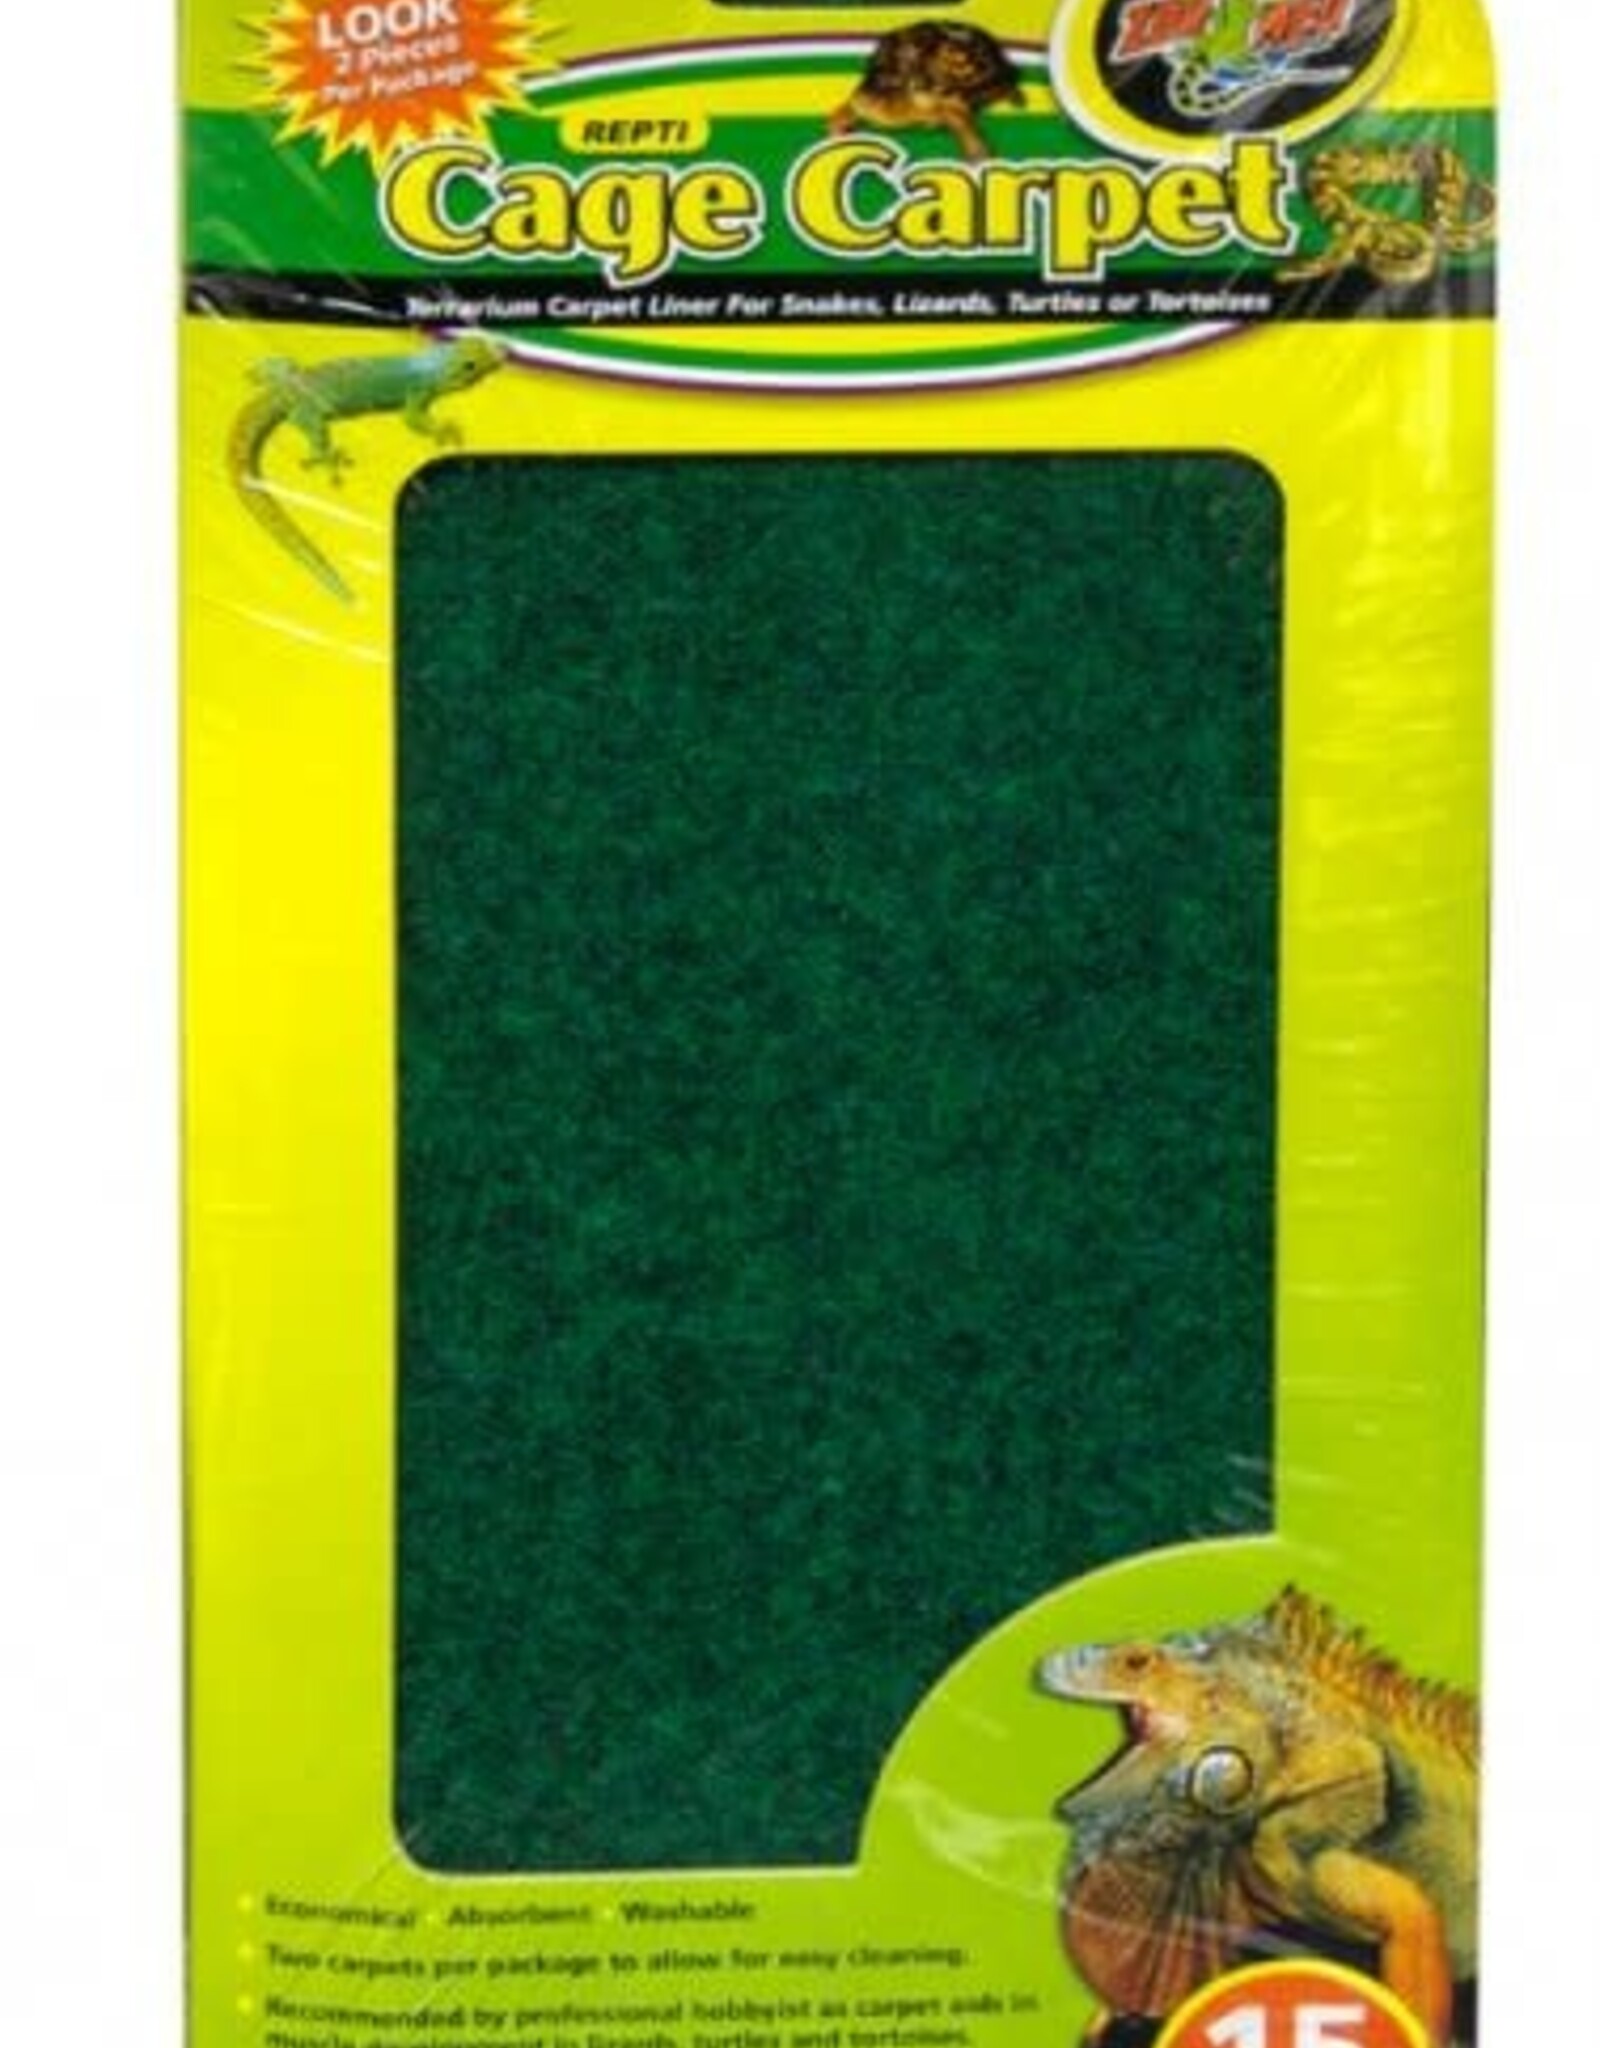 ZOO MED LABORATORIES, INC. ZOO MED- CC-15- LINER- CAGE CARPET- 15 GALLON- 24 INCH